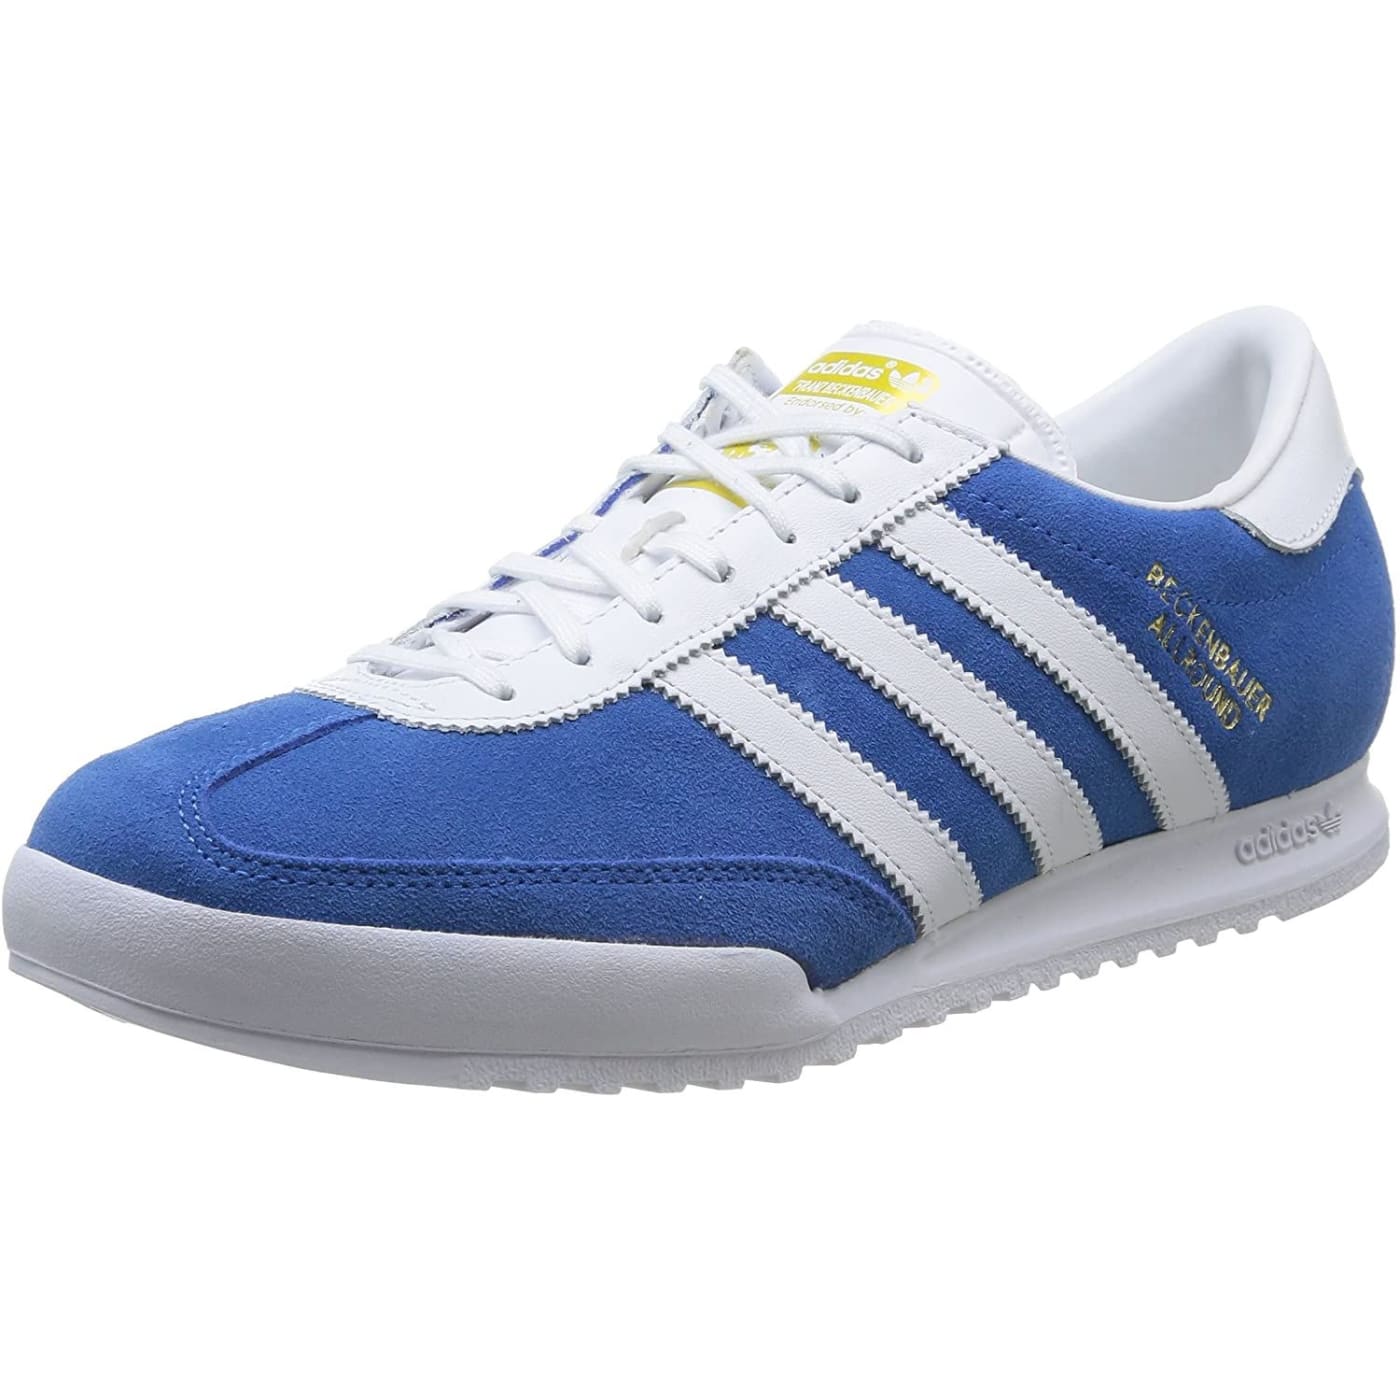 Adidas Original Blue White Mens Leather Trainers – Top Brand Shoes